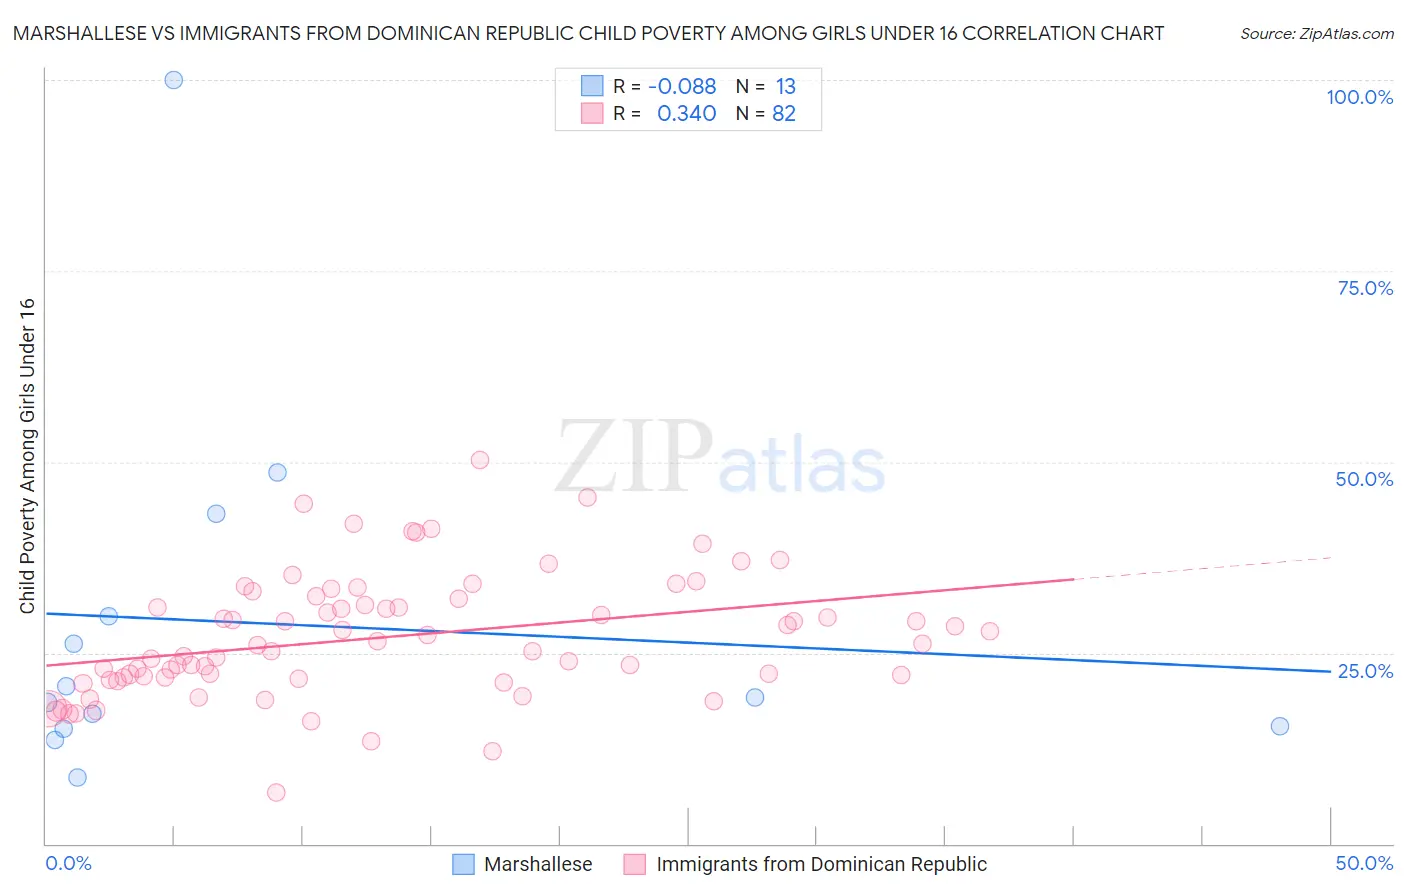 Marshallese vs Immigrants from Dominican Republic Child Poverty Among Girls Under 16